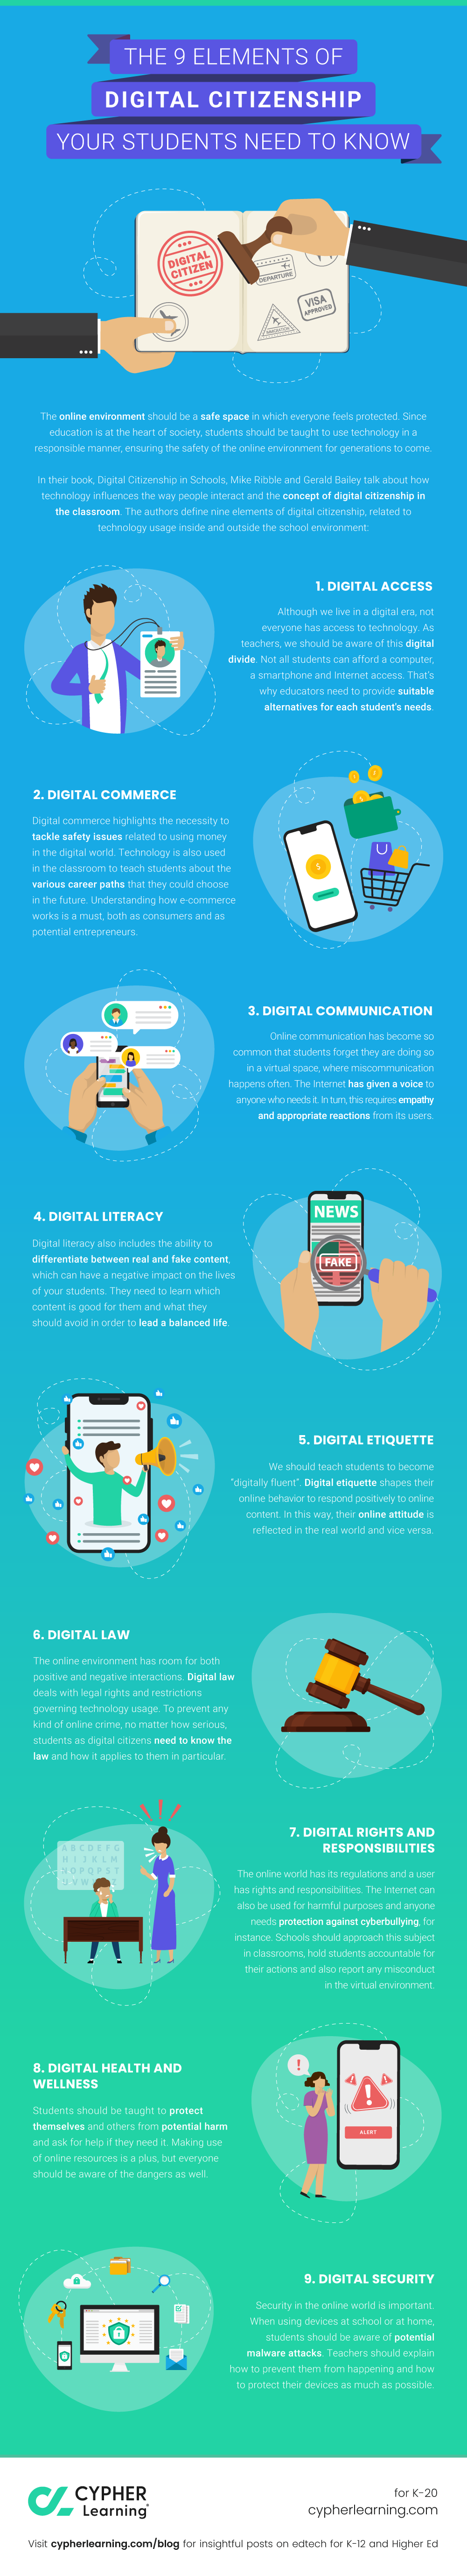 https://www.cypherlearning.com/hs-fs/hubfs/resources/infographics/neo/the-9-elements-of-digital-citizenship-your-students-need-to-know.png?width=1001&name=the-9-elements-of-digital-citizenship-your-students-need-to-know.png